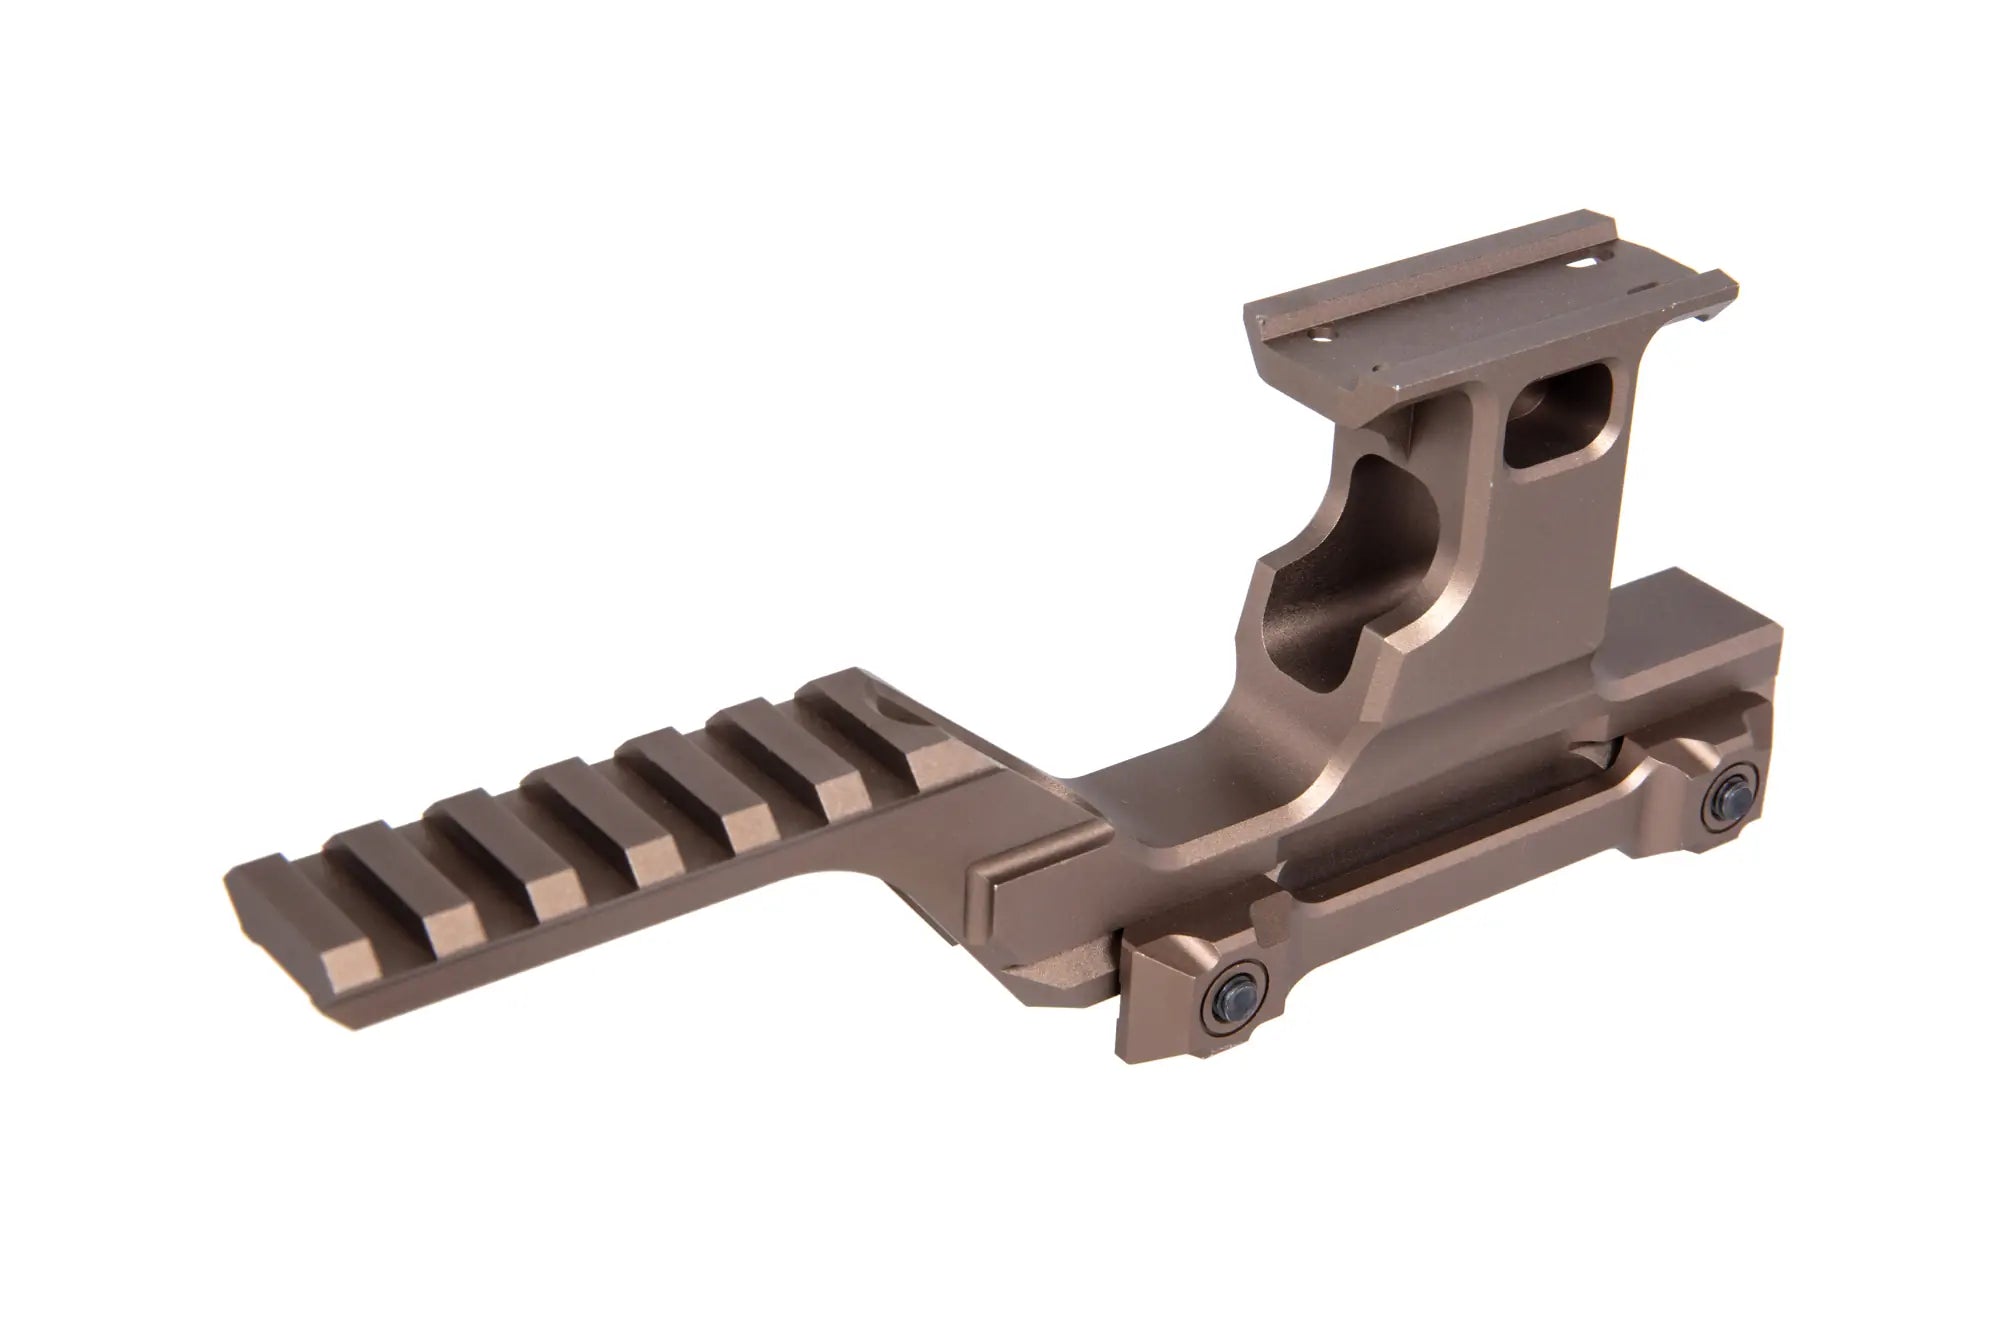 WADSN high mount for T1/T2 and PEQ FDE collimators